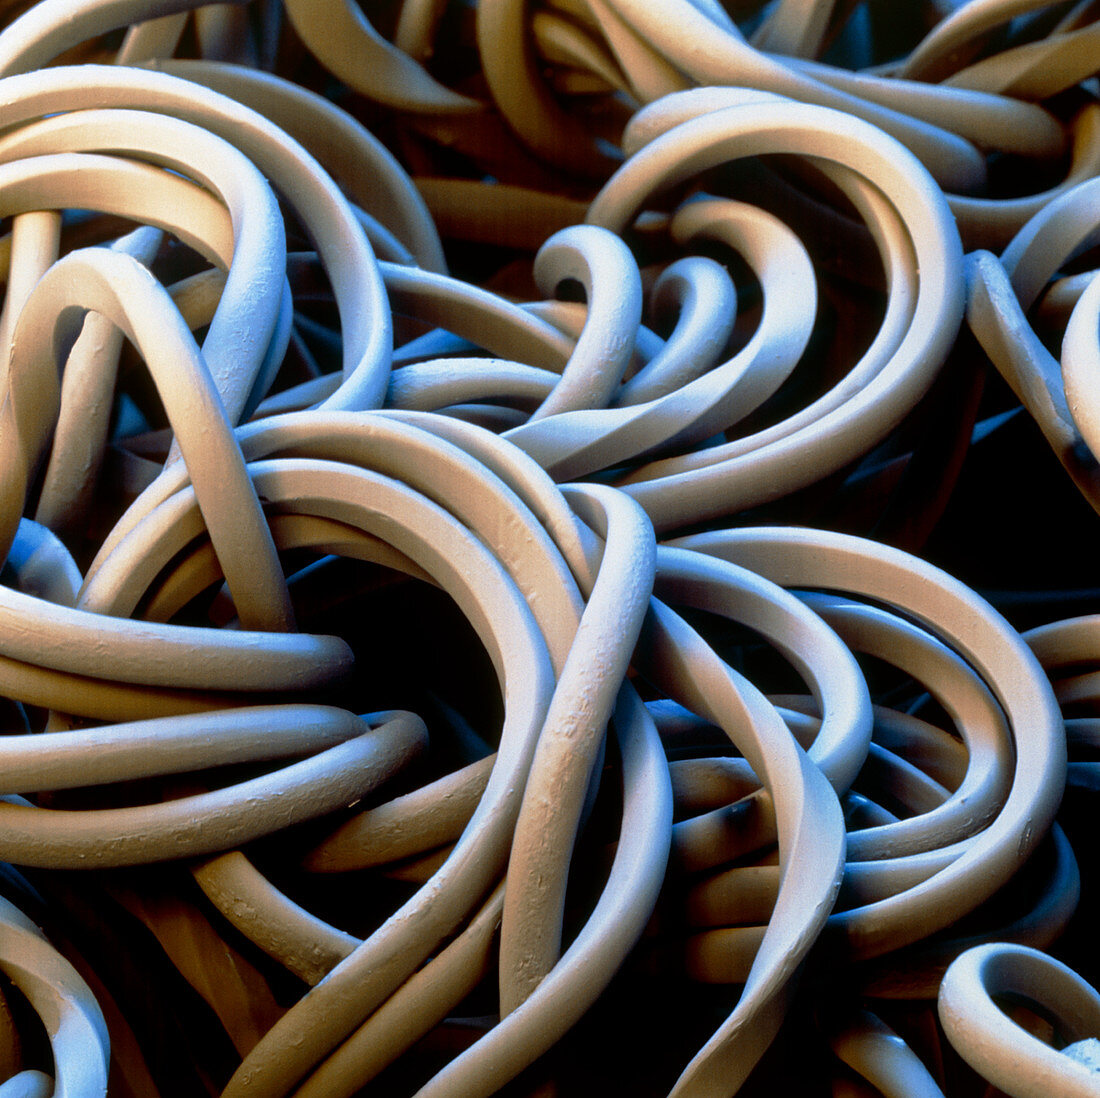 Coloured SEM of the weave of a nylon stocking